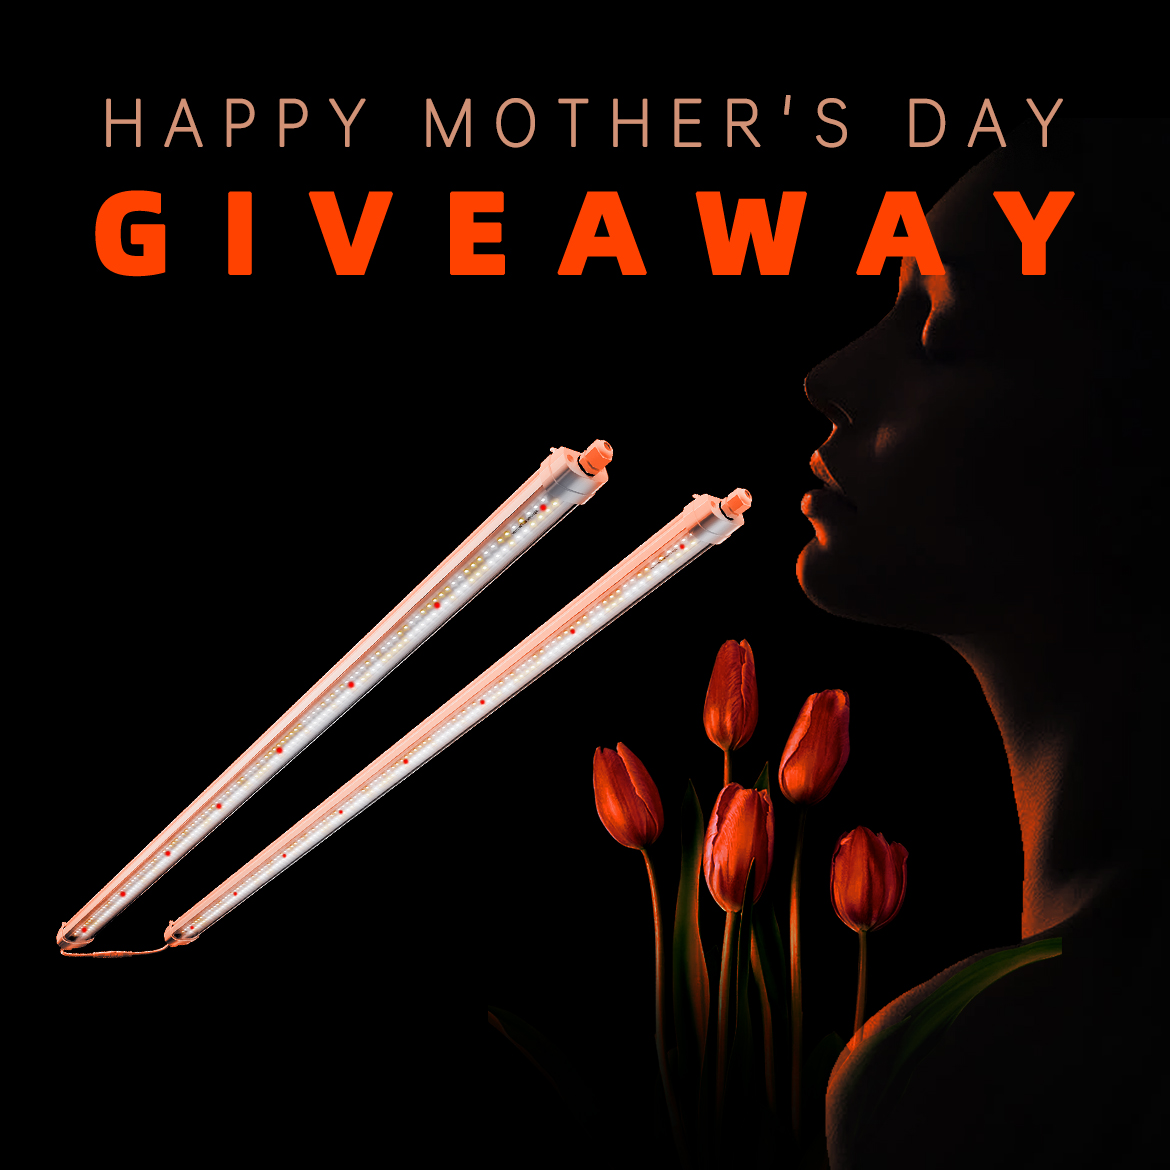 👩Mother’s Day GIVEAWAY are here!💐🌸 🔔RULE: 1⃣ Follow us 2⃣ Like & RT 3⃣ Turn MY noti on,and screenshot 4⃣ Tag 3 friends Finally, I wish all my fans and the greatest superhuman mothers a happy holiday！！！👩💐 ✨Good luck! #SpiderFarmer #giveaway #glow80